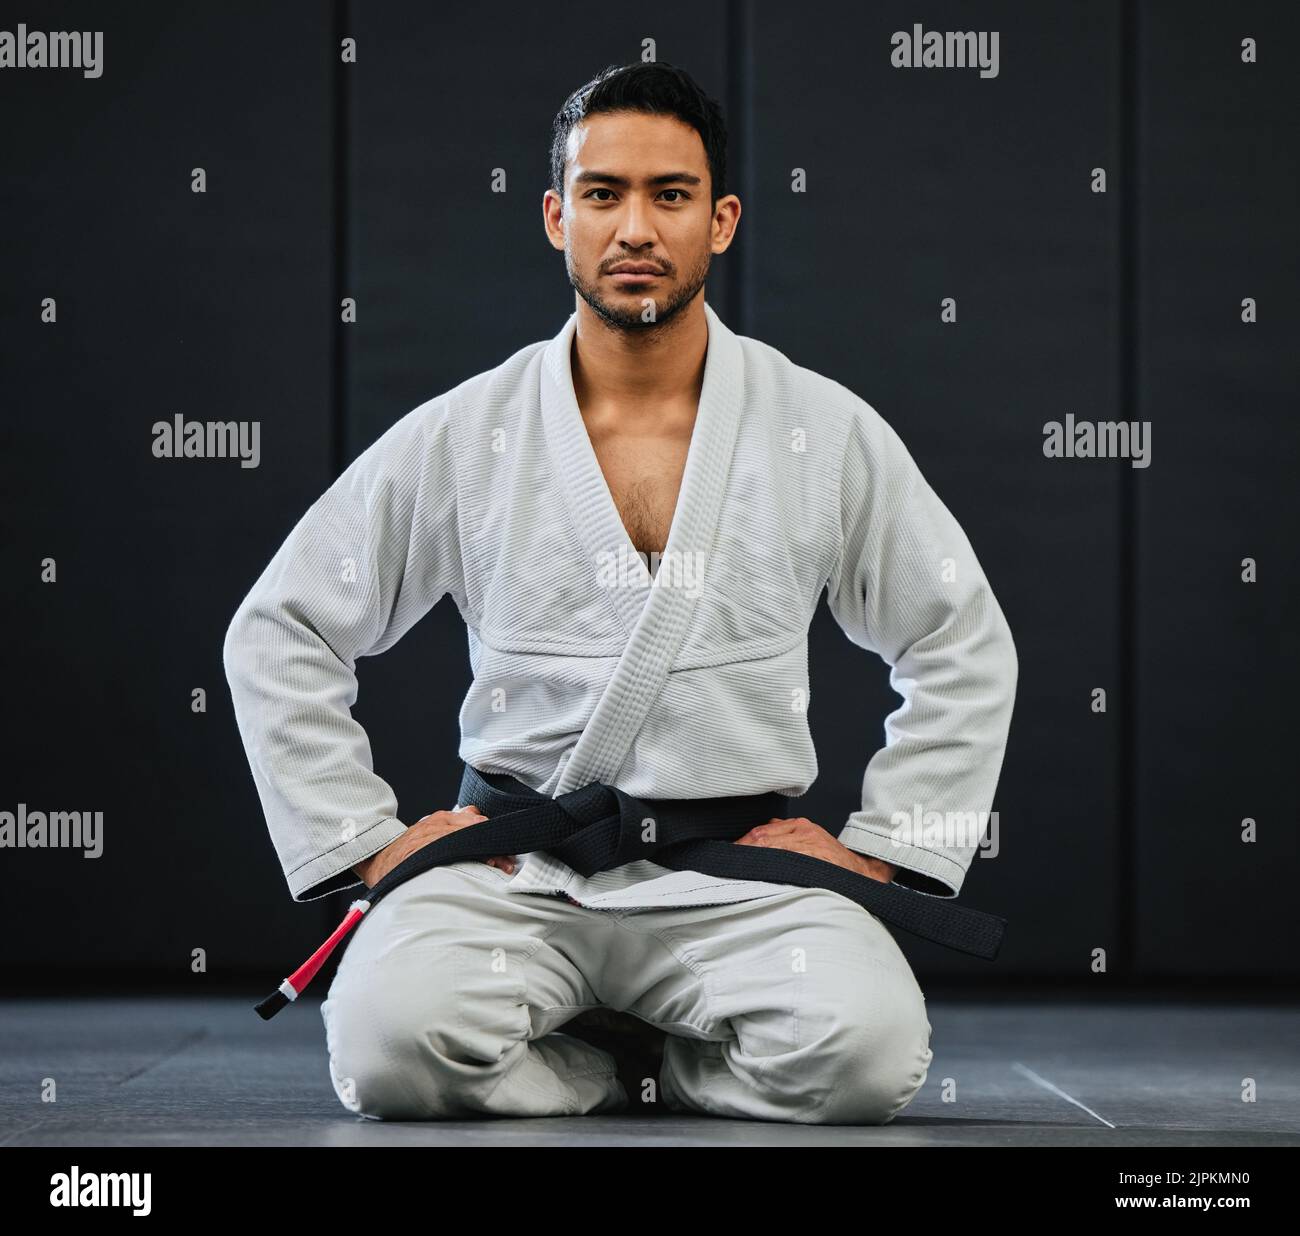 . Male coach ready for karate training at fitness studio, looking serious at dojo practice in gym and sitting on the floor at a self defense class Stock Photo